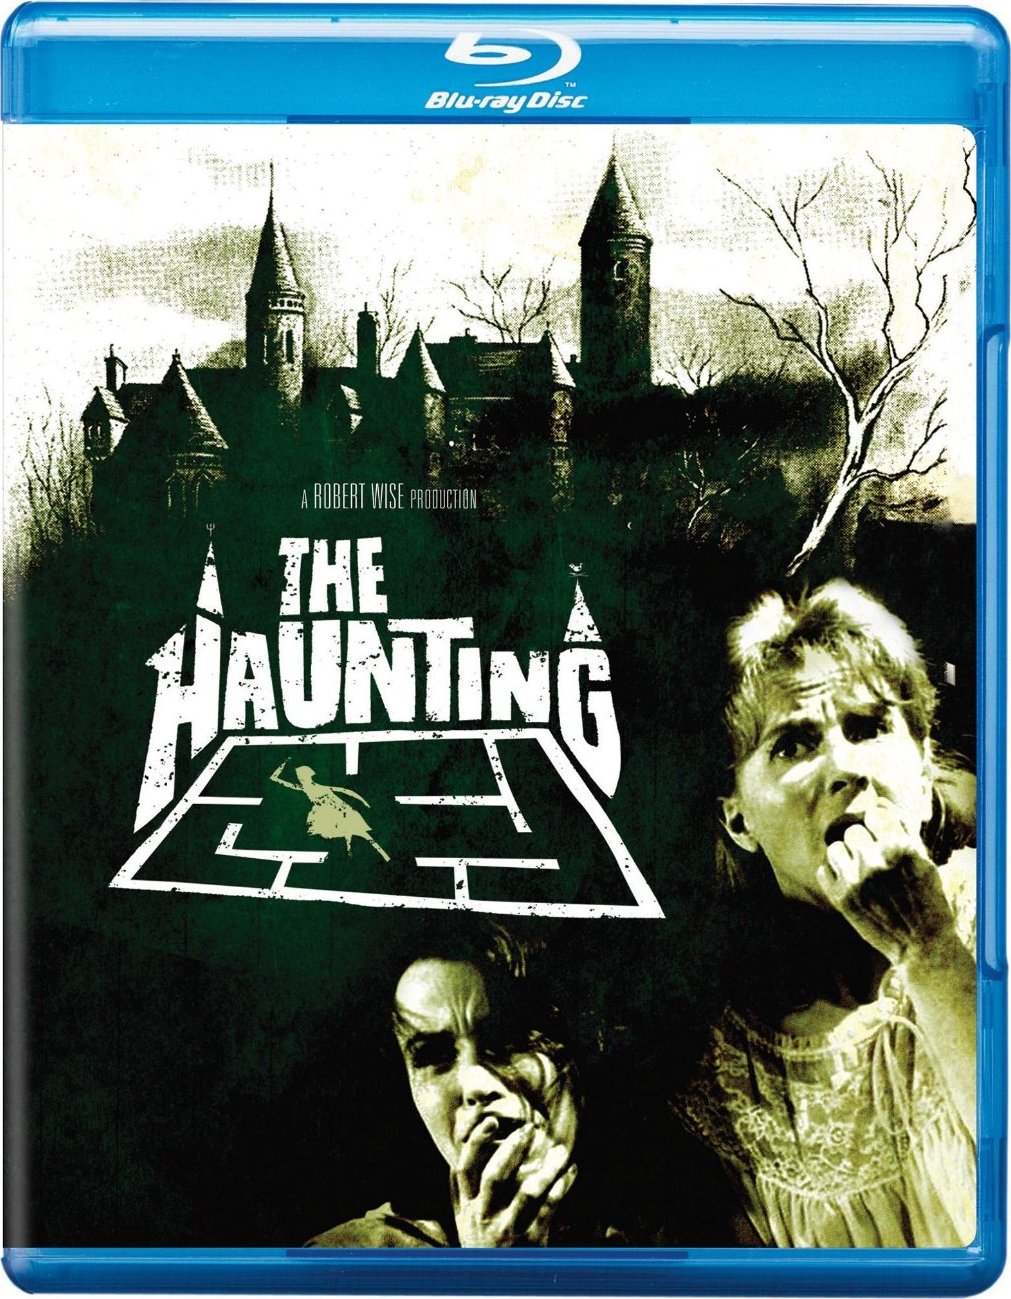 55 Top Photos The Haunting 1963 Full Movie / The Haunted Palace (1963) Stars: Vincent Price, Debra ...